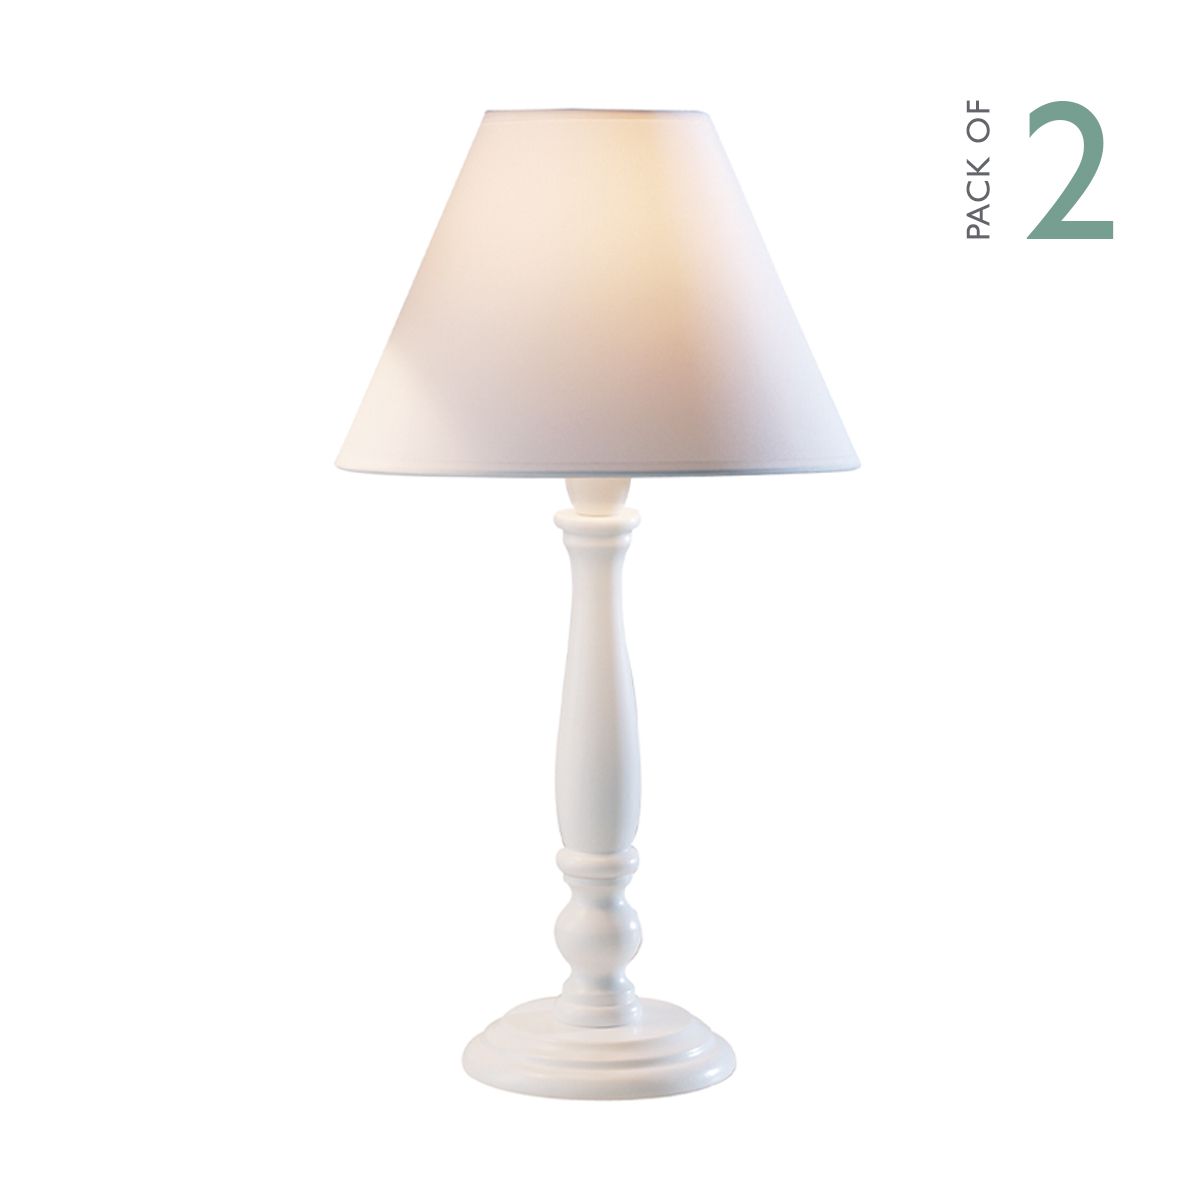 Regal Table Lamp 10 Inch White Complete, White Wooden Candlestick Lamp Base